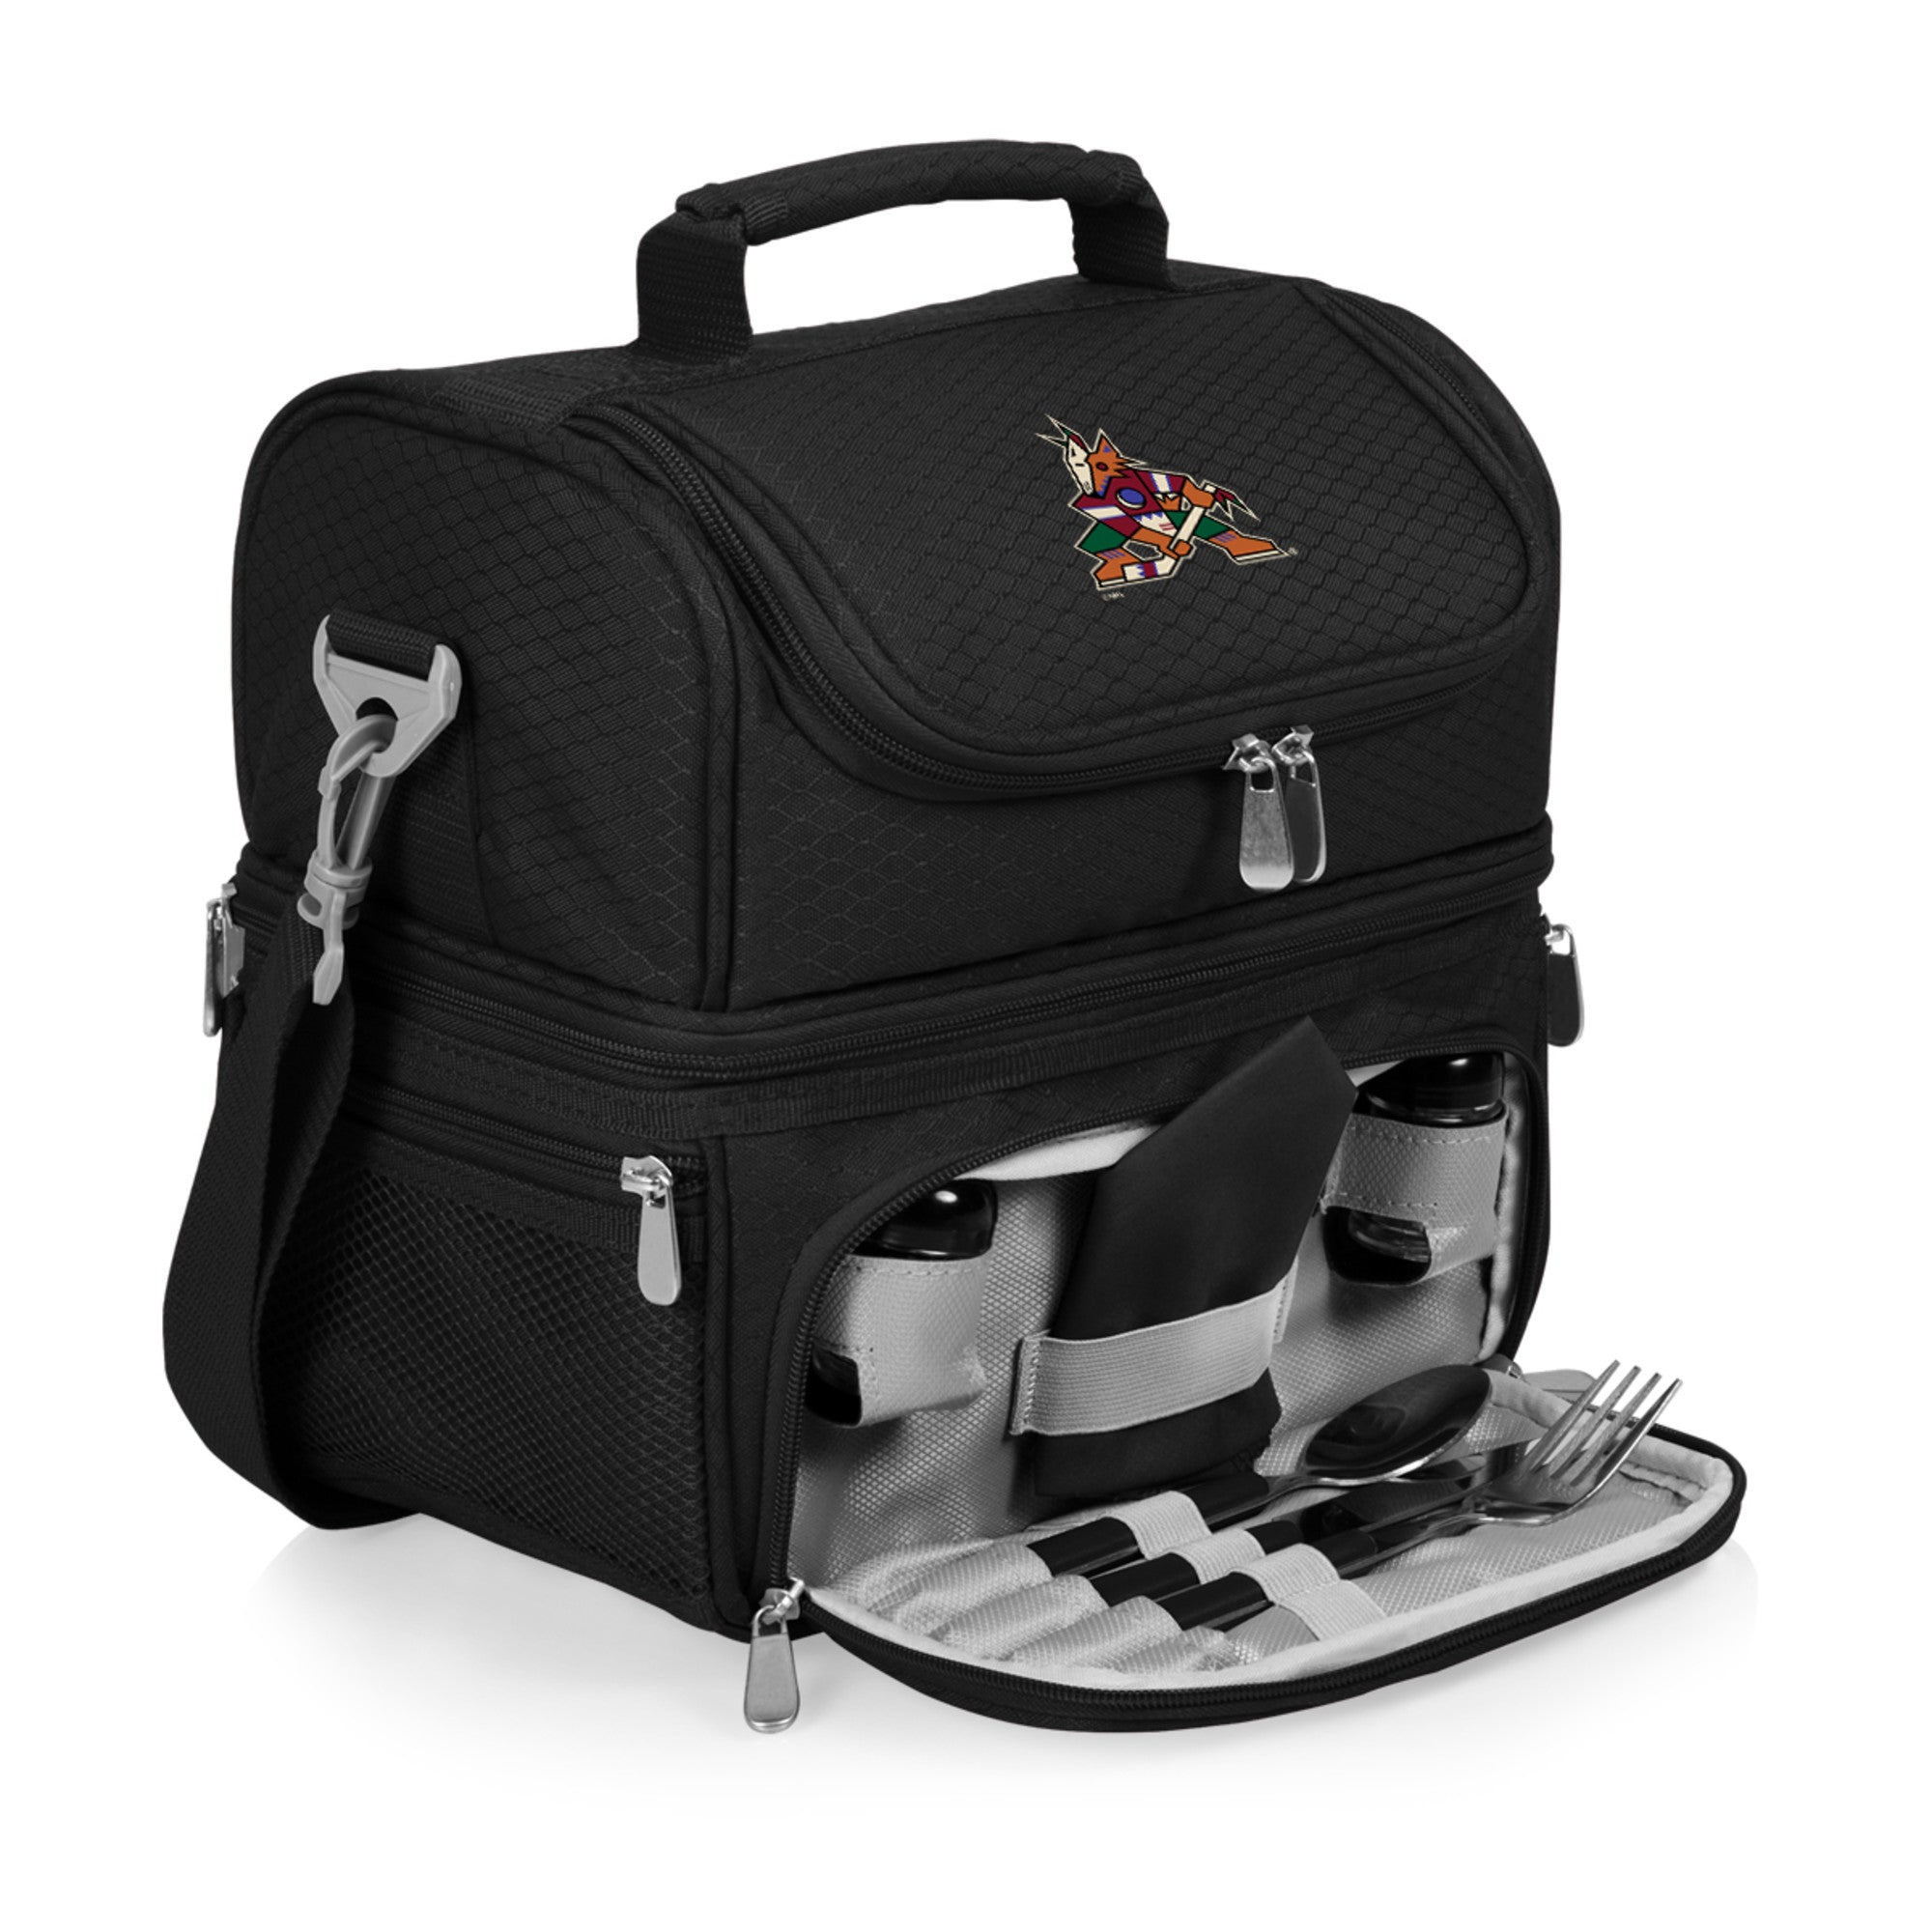 Arizona Coyotes - Pranzo Lunch Bag Cooler with Utensils